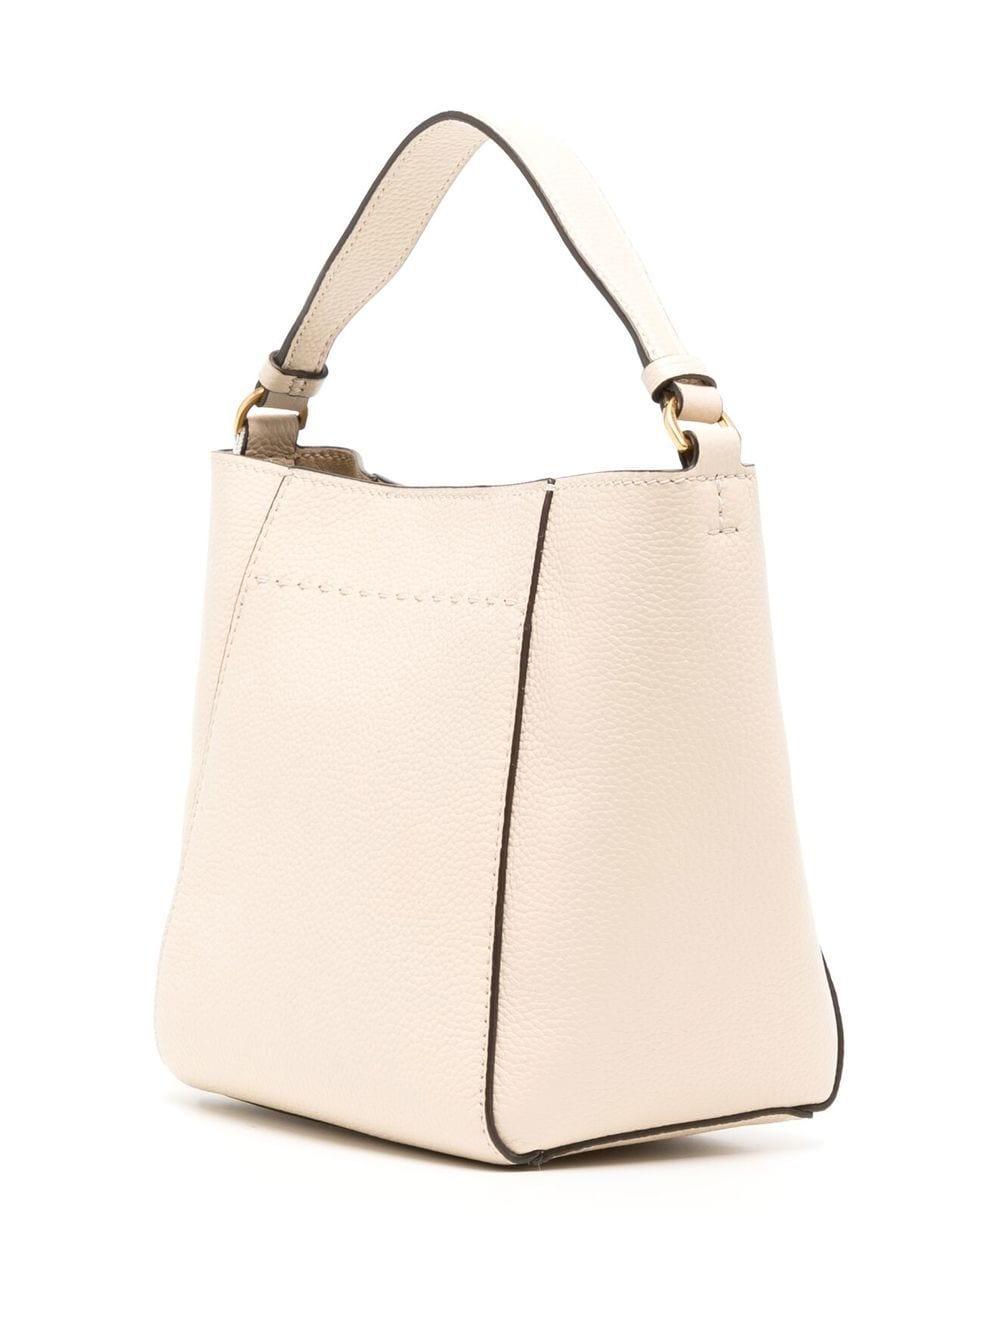 Tory Burch Small Mcgraw Leather Bucket Bag in Blanc